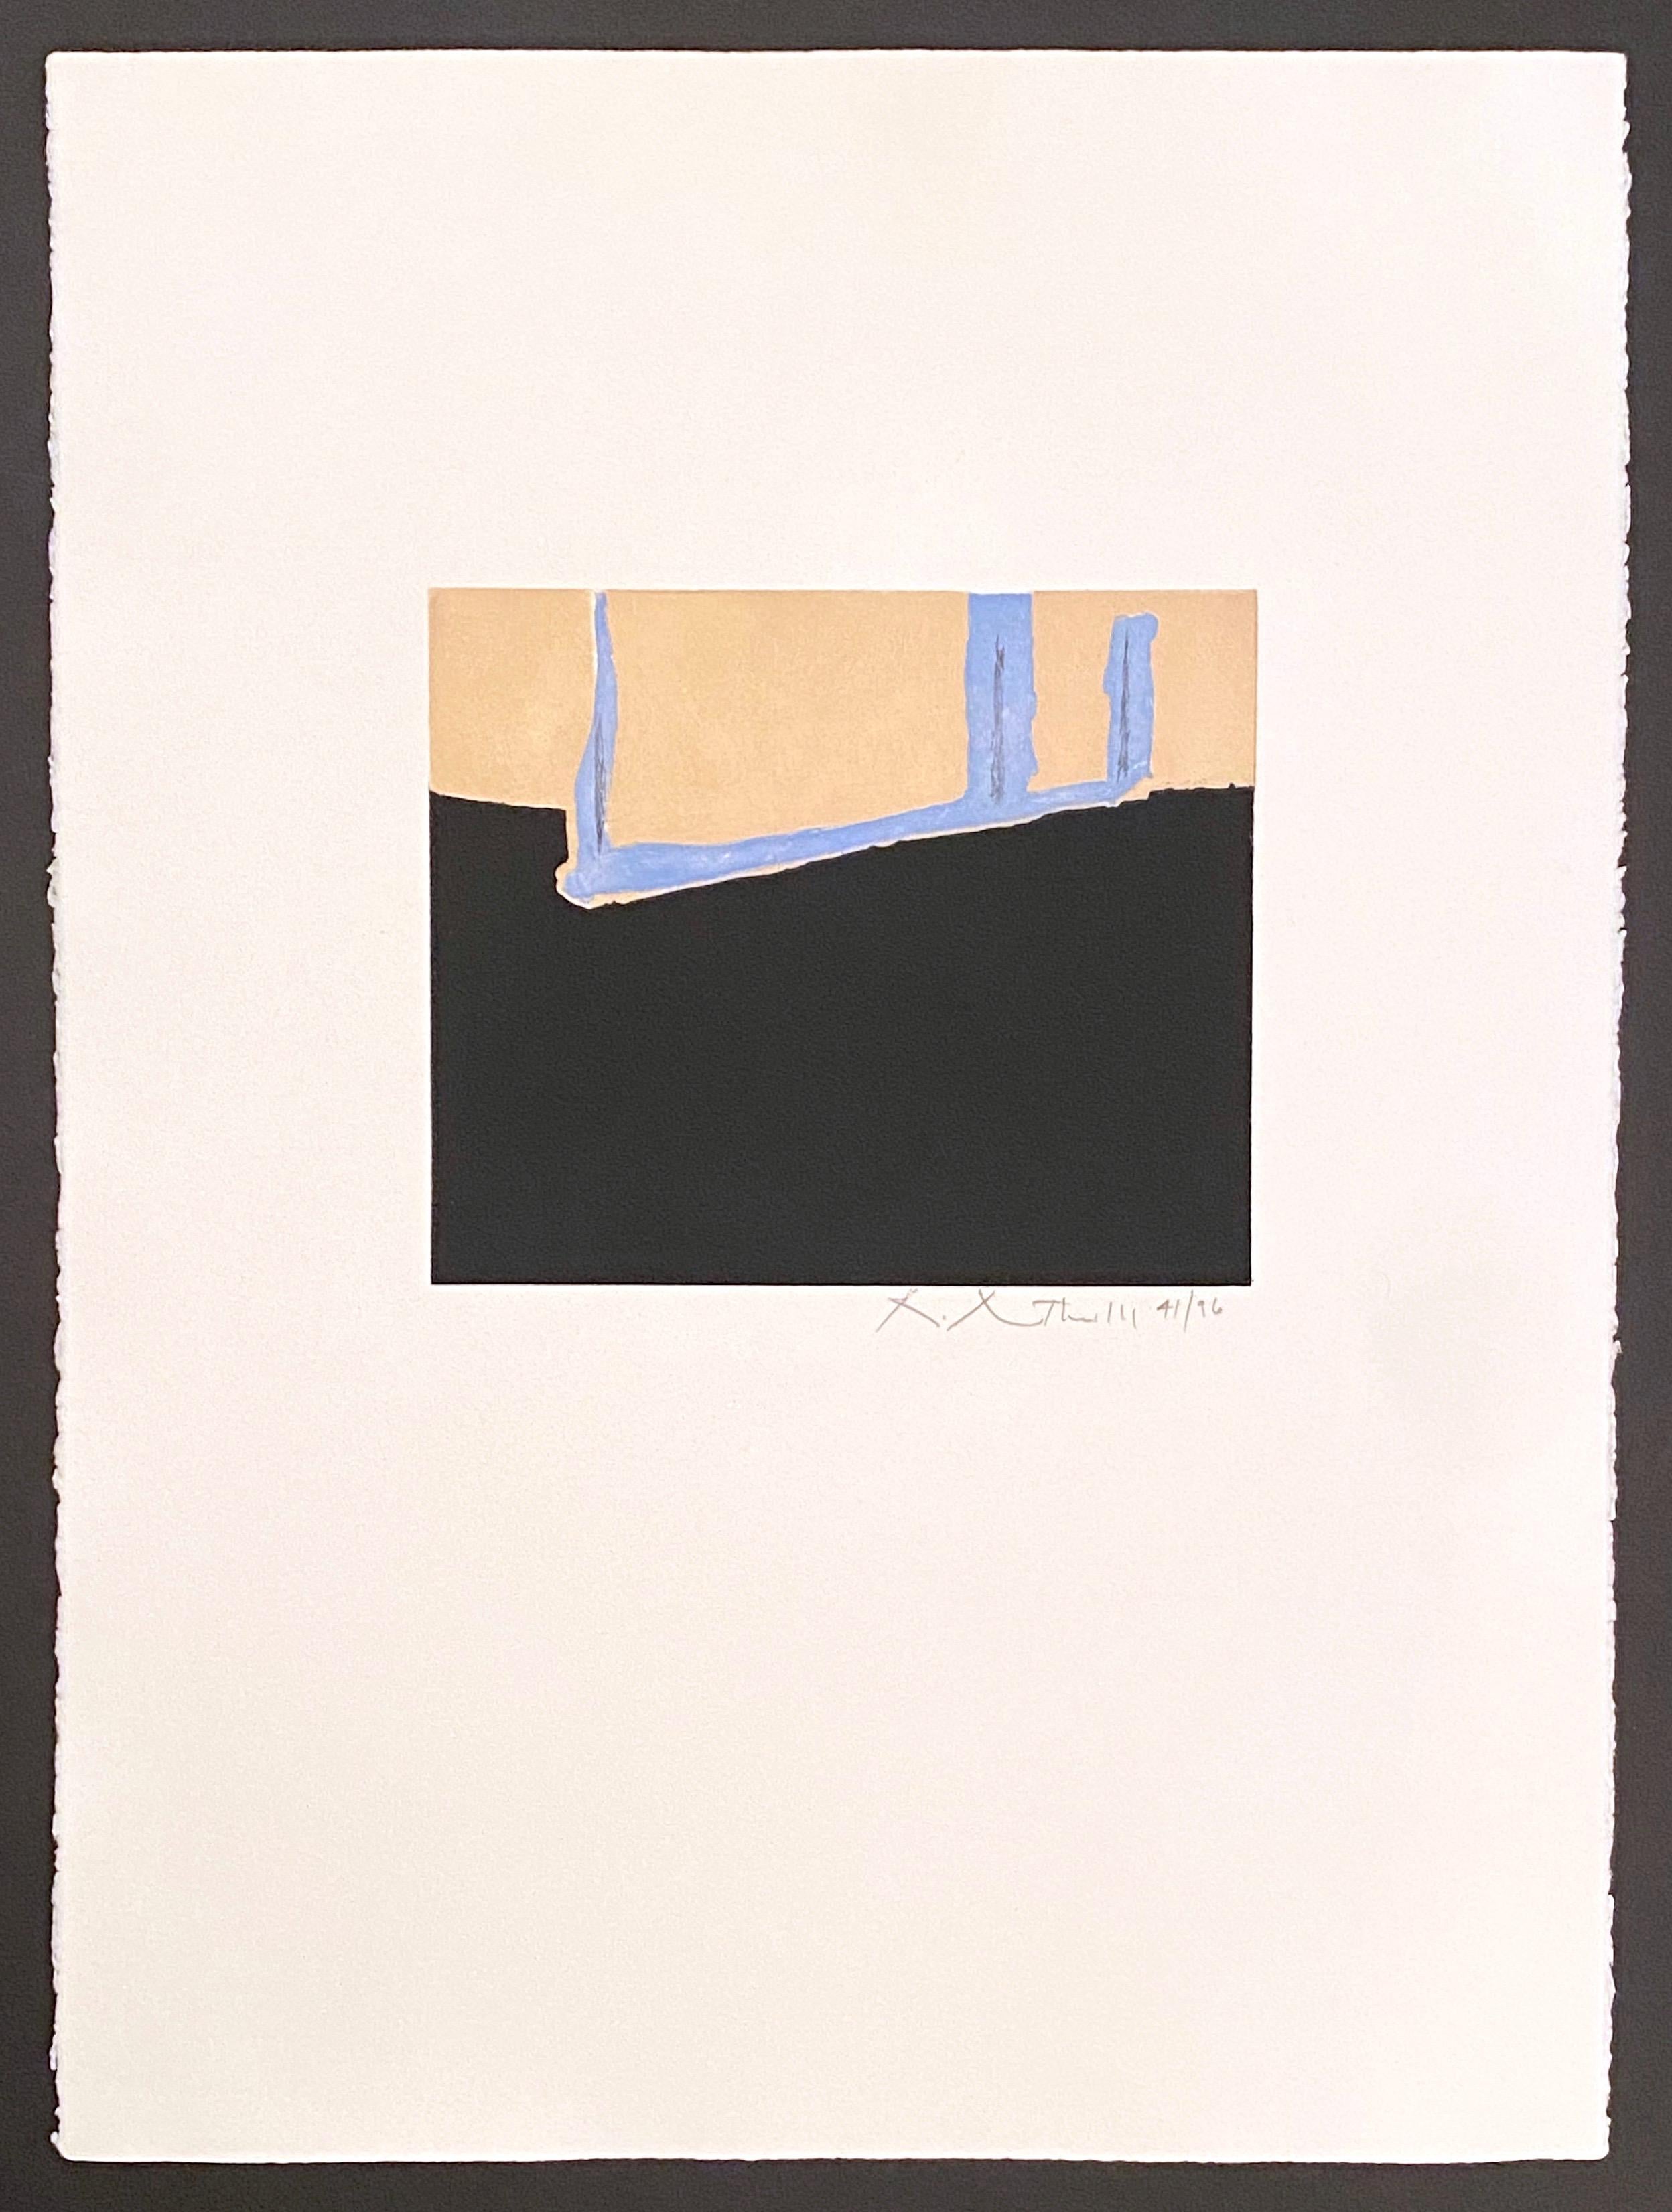 Created by the artist in 1975, Robert Motherwell’s, Untitled is an exceptional etching and aquatint, hand-signed in pencil, and numbered, measuring 30 x 22 in. (76.2 x 60 cm), unframed from the edition of 96.  This artwork is recognized in the